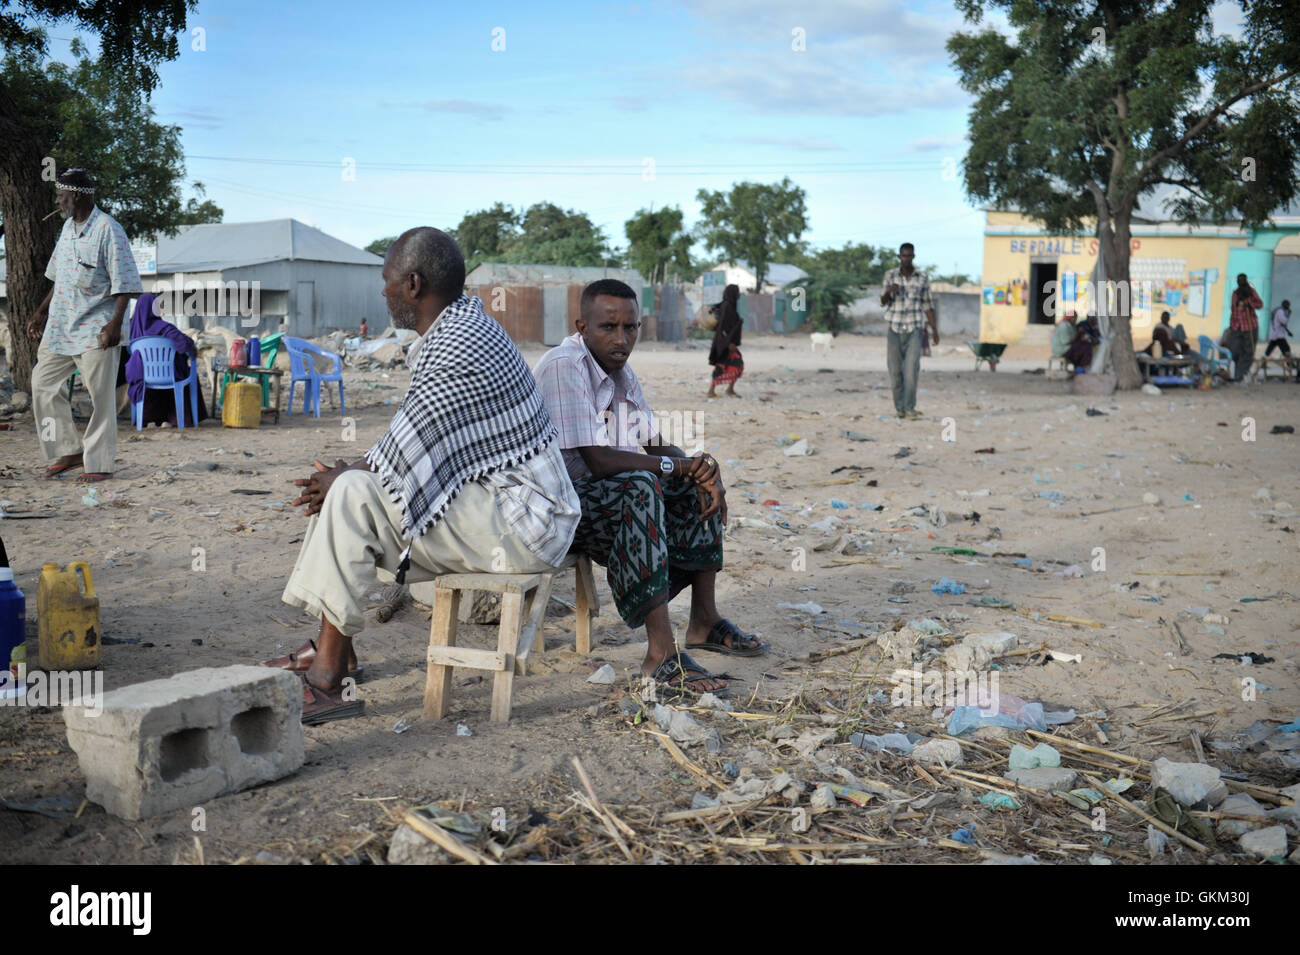 Two men sit near Bakara Animal Market in Mogadishu, Somalia, on April 13. Once notorious for being both the site of Black Hawk Down, in which 18 American soldiers were killed in 1993, and later as an al-Shabaab stronghold, Bakara market is now slowly losing its past notoriety and becoming better known for its thriving economy. In the district's animal market, thousands of goats are now brought each morning, where they are sold on to later be slaughtered for their meat. AU UN IST PHOTO / TOBIN JONES. Stock Photo